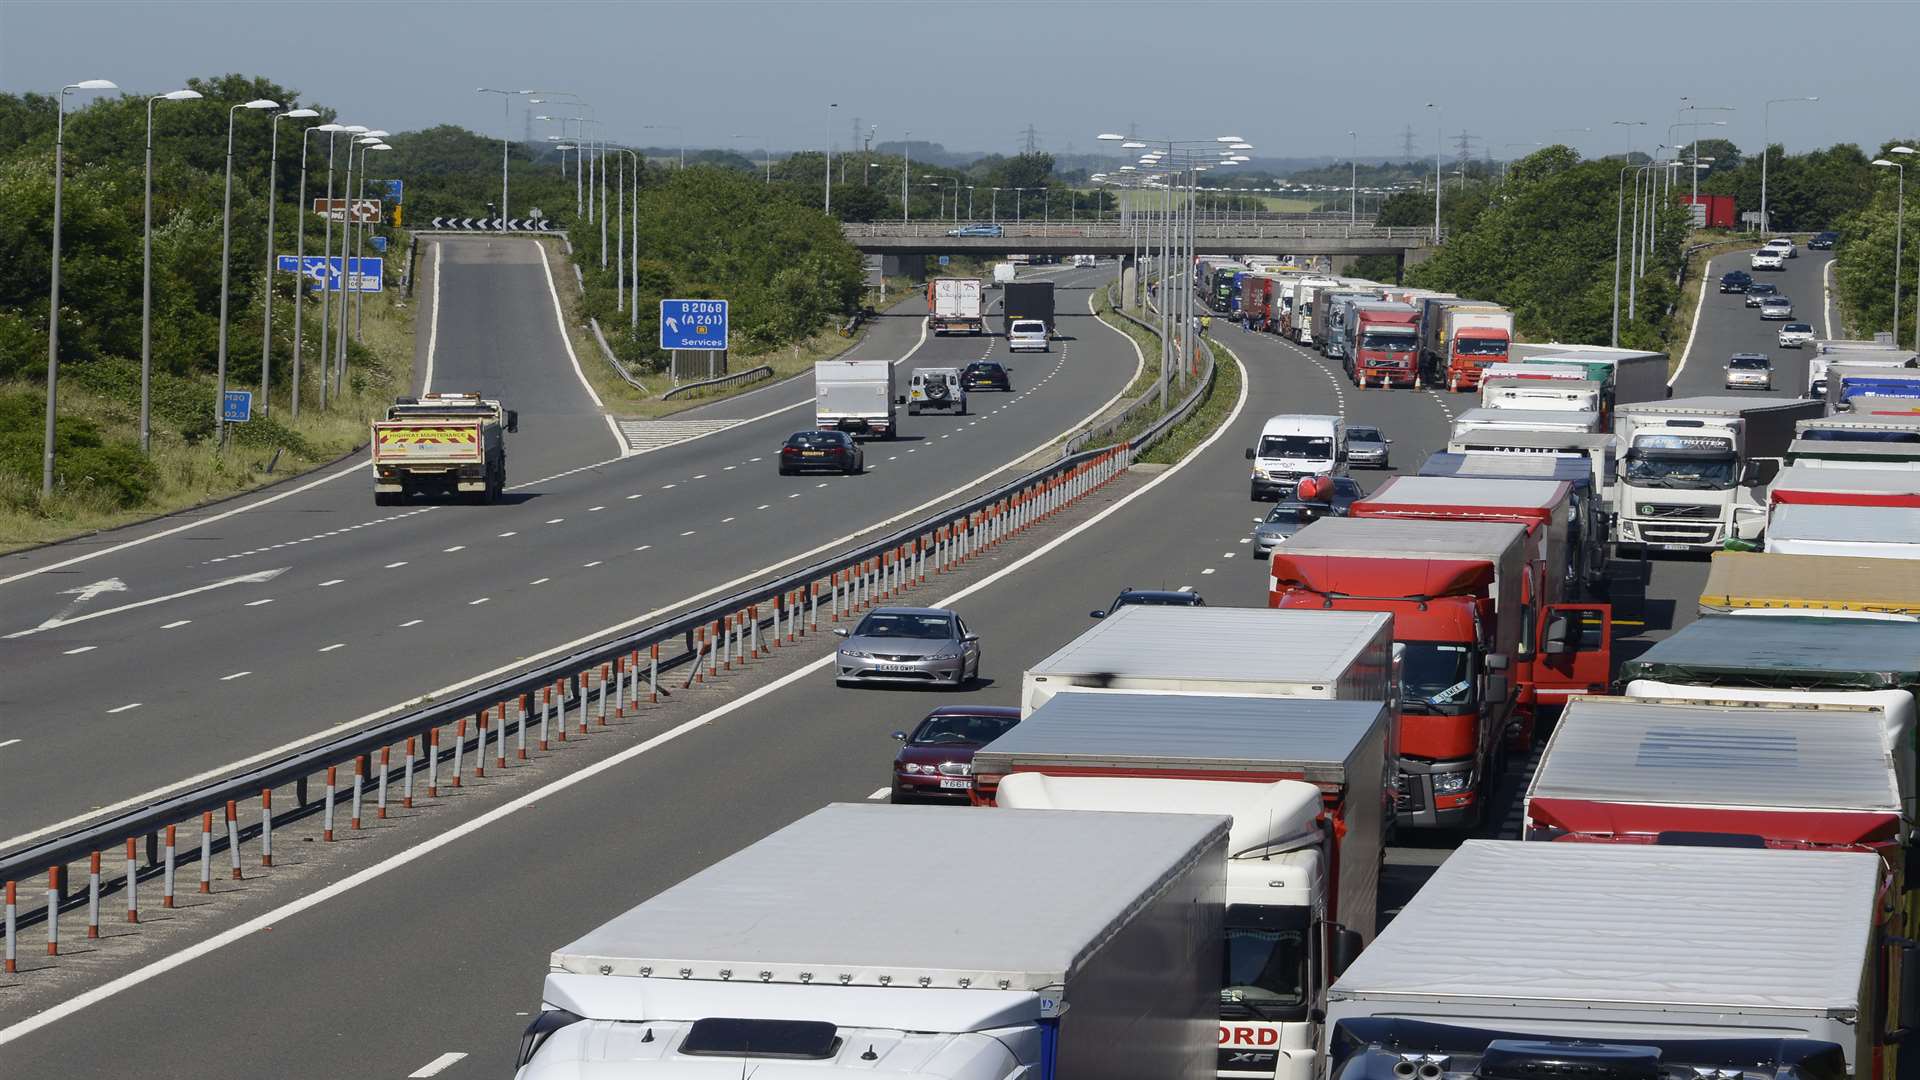 Lorries on the M20 as part of Operation Stack. Picture: Paul Amos